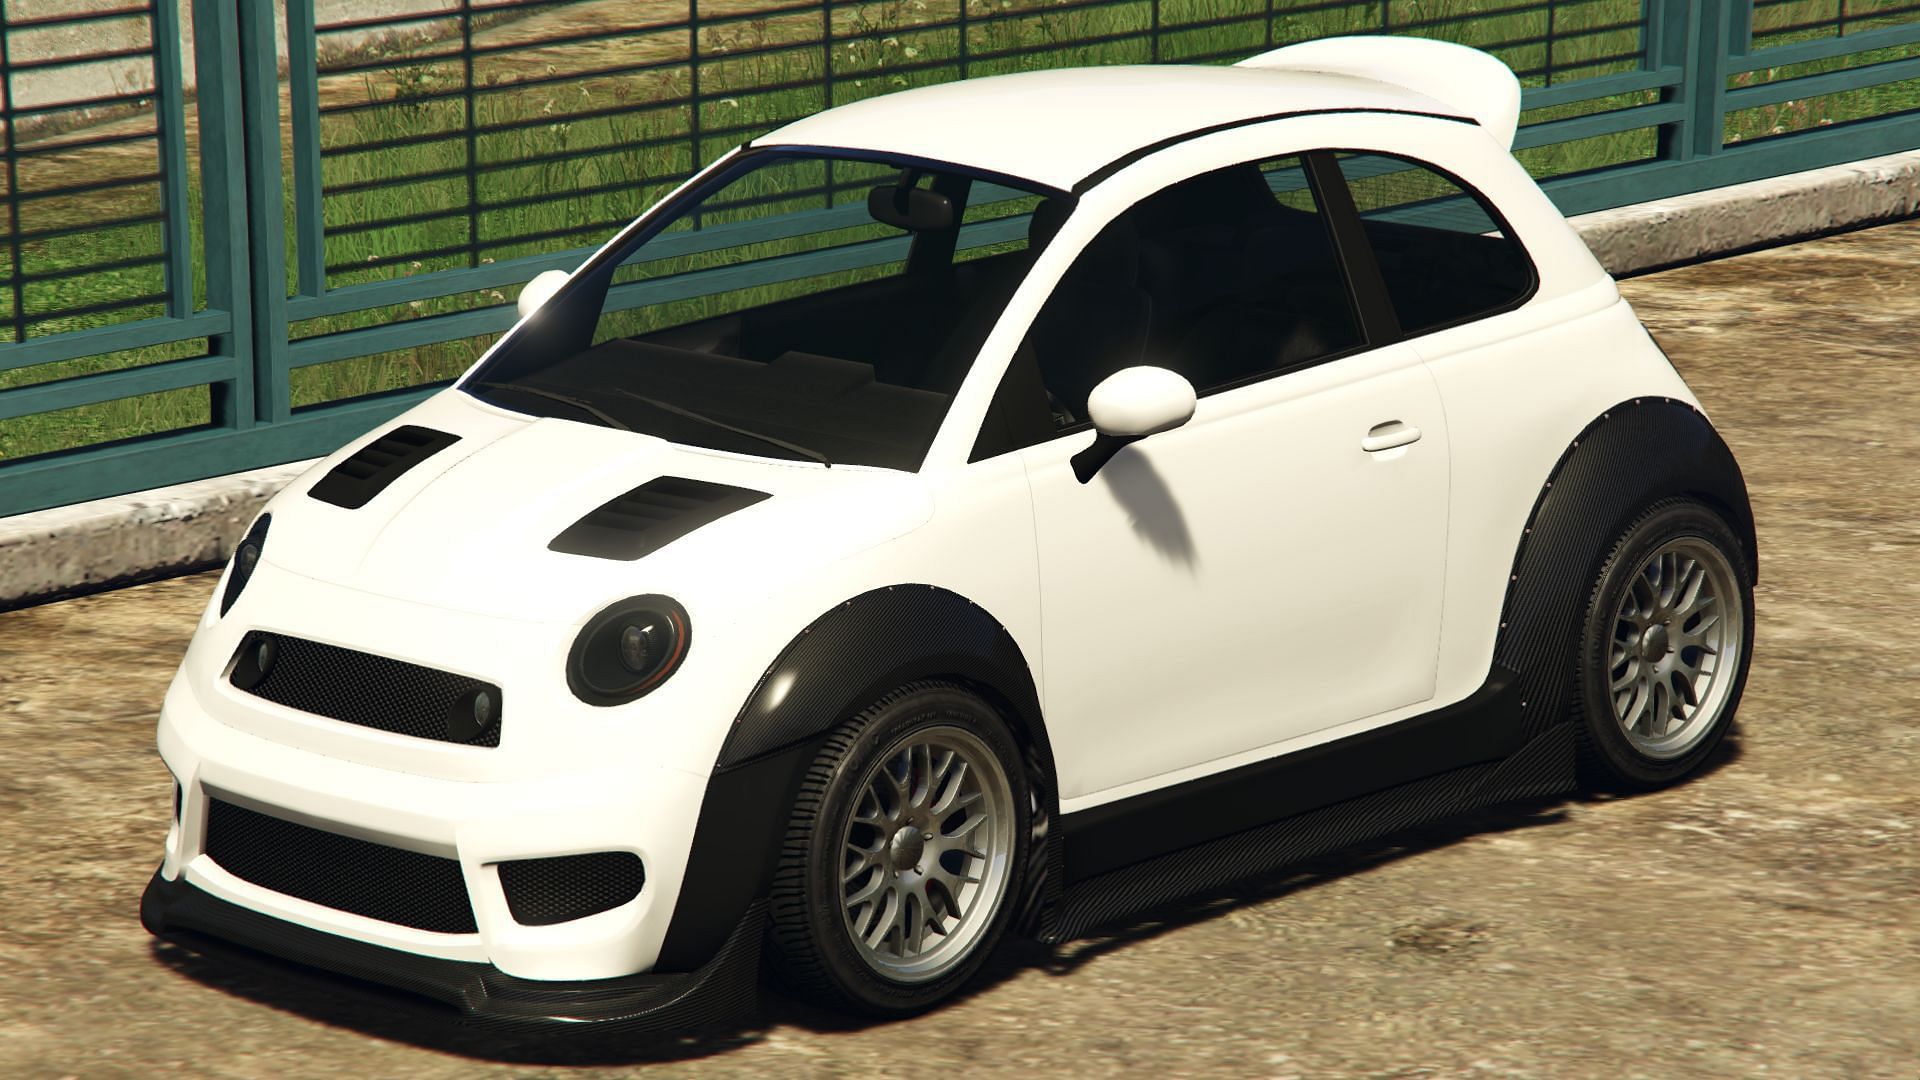 The Brioso R/A is the slowest, yet cheapest option (Image via Rockstar Games)